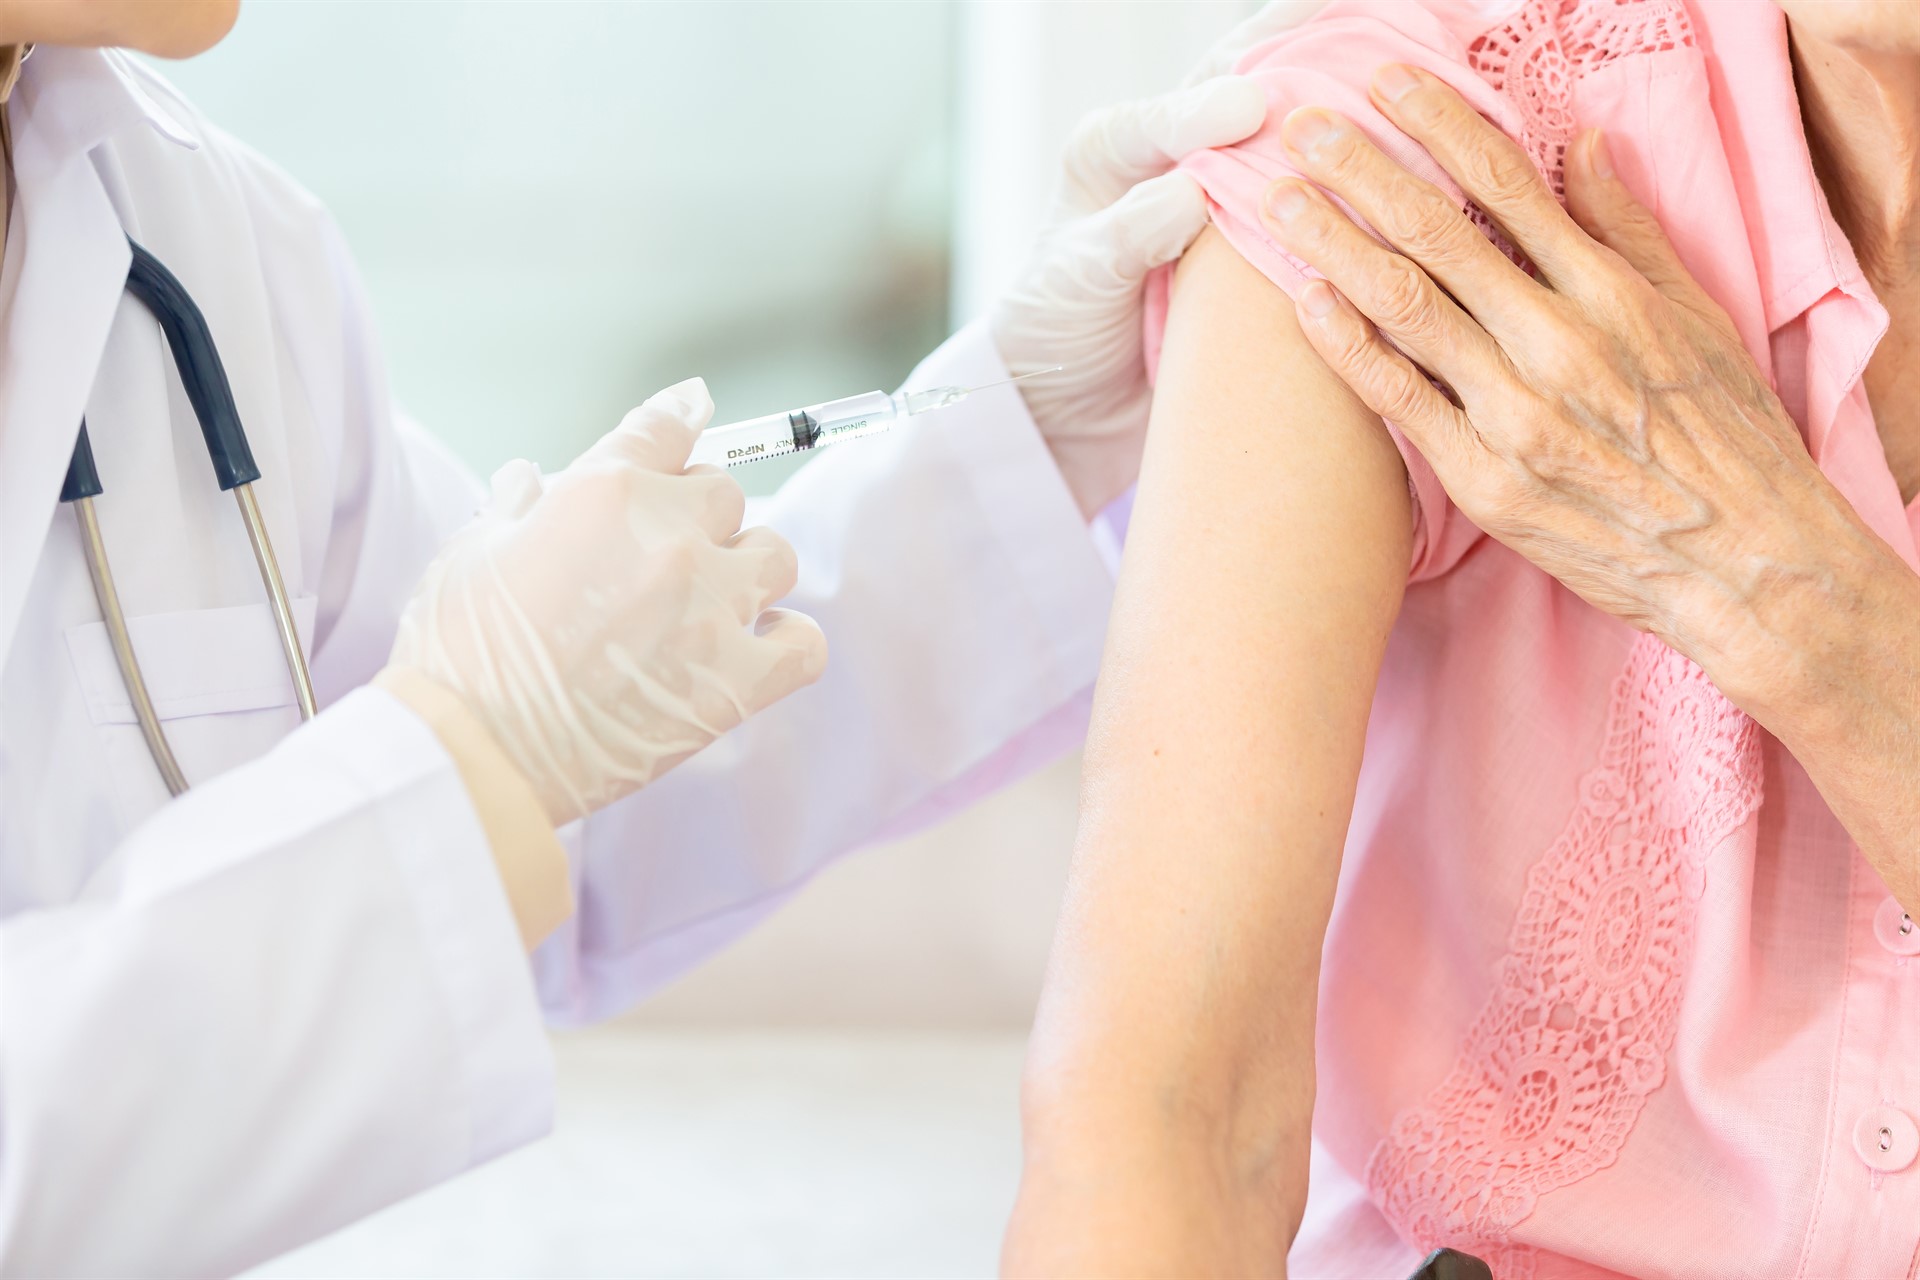 Think Immunizations are Just for Kids?